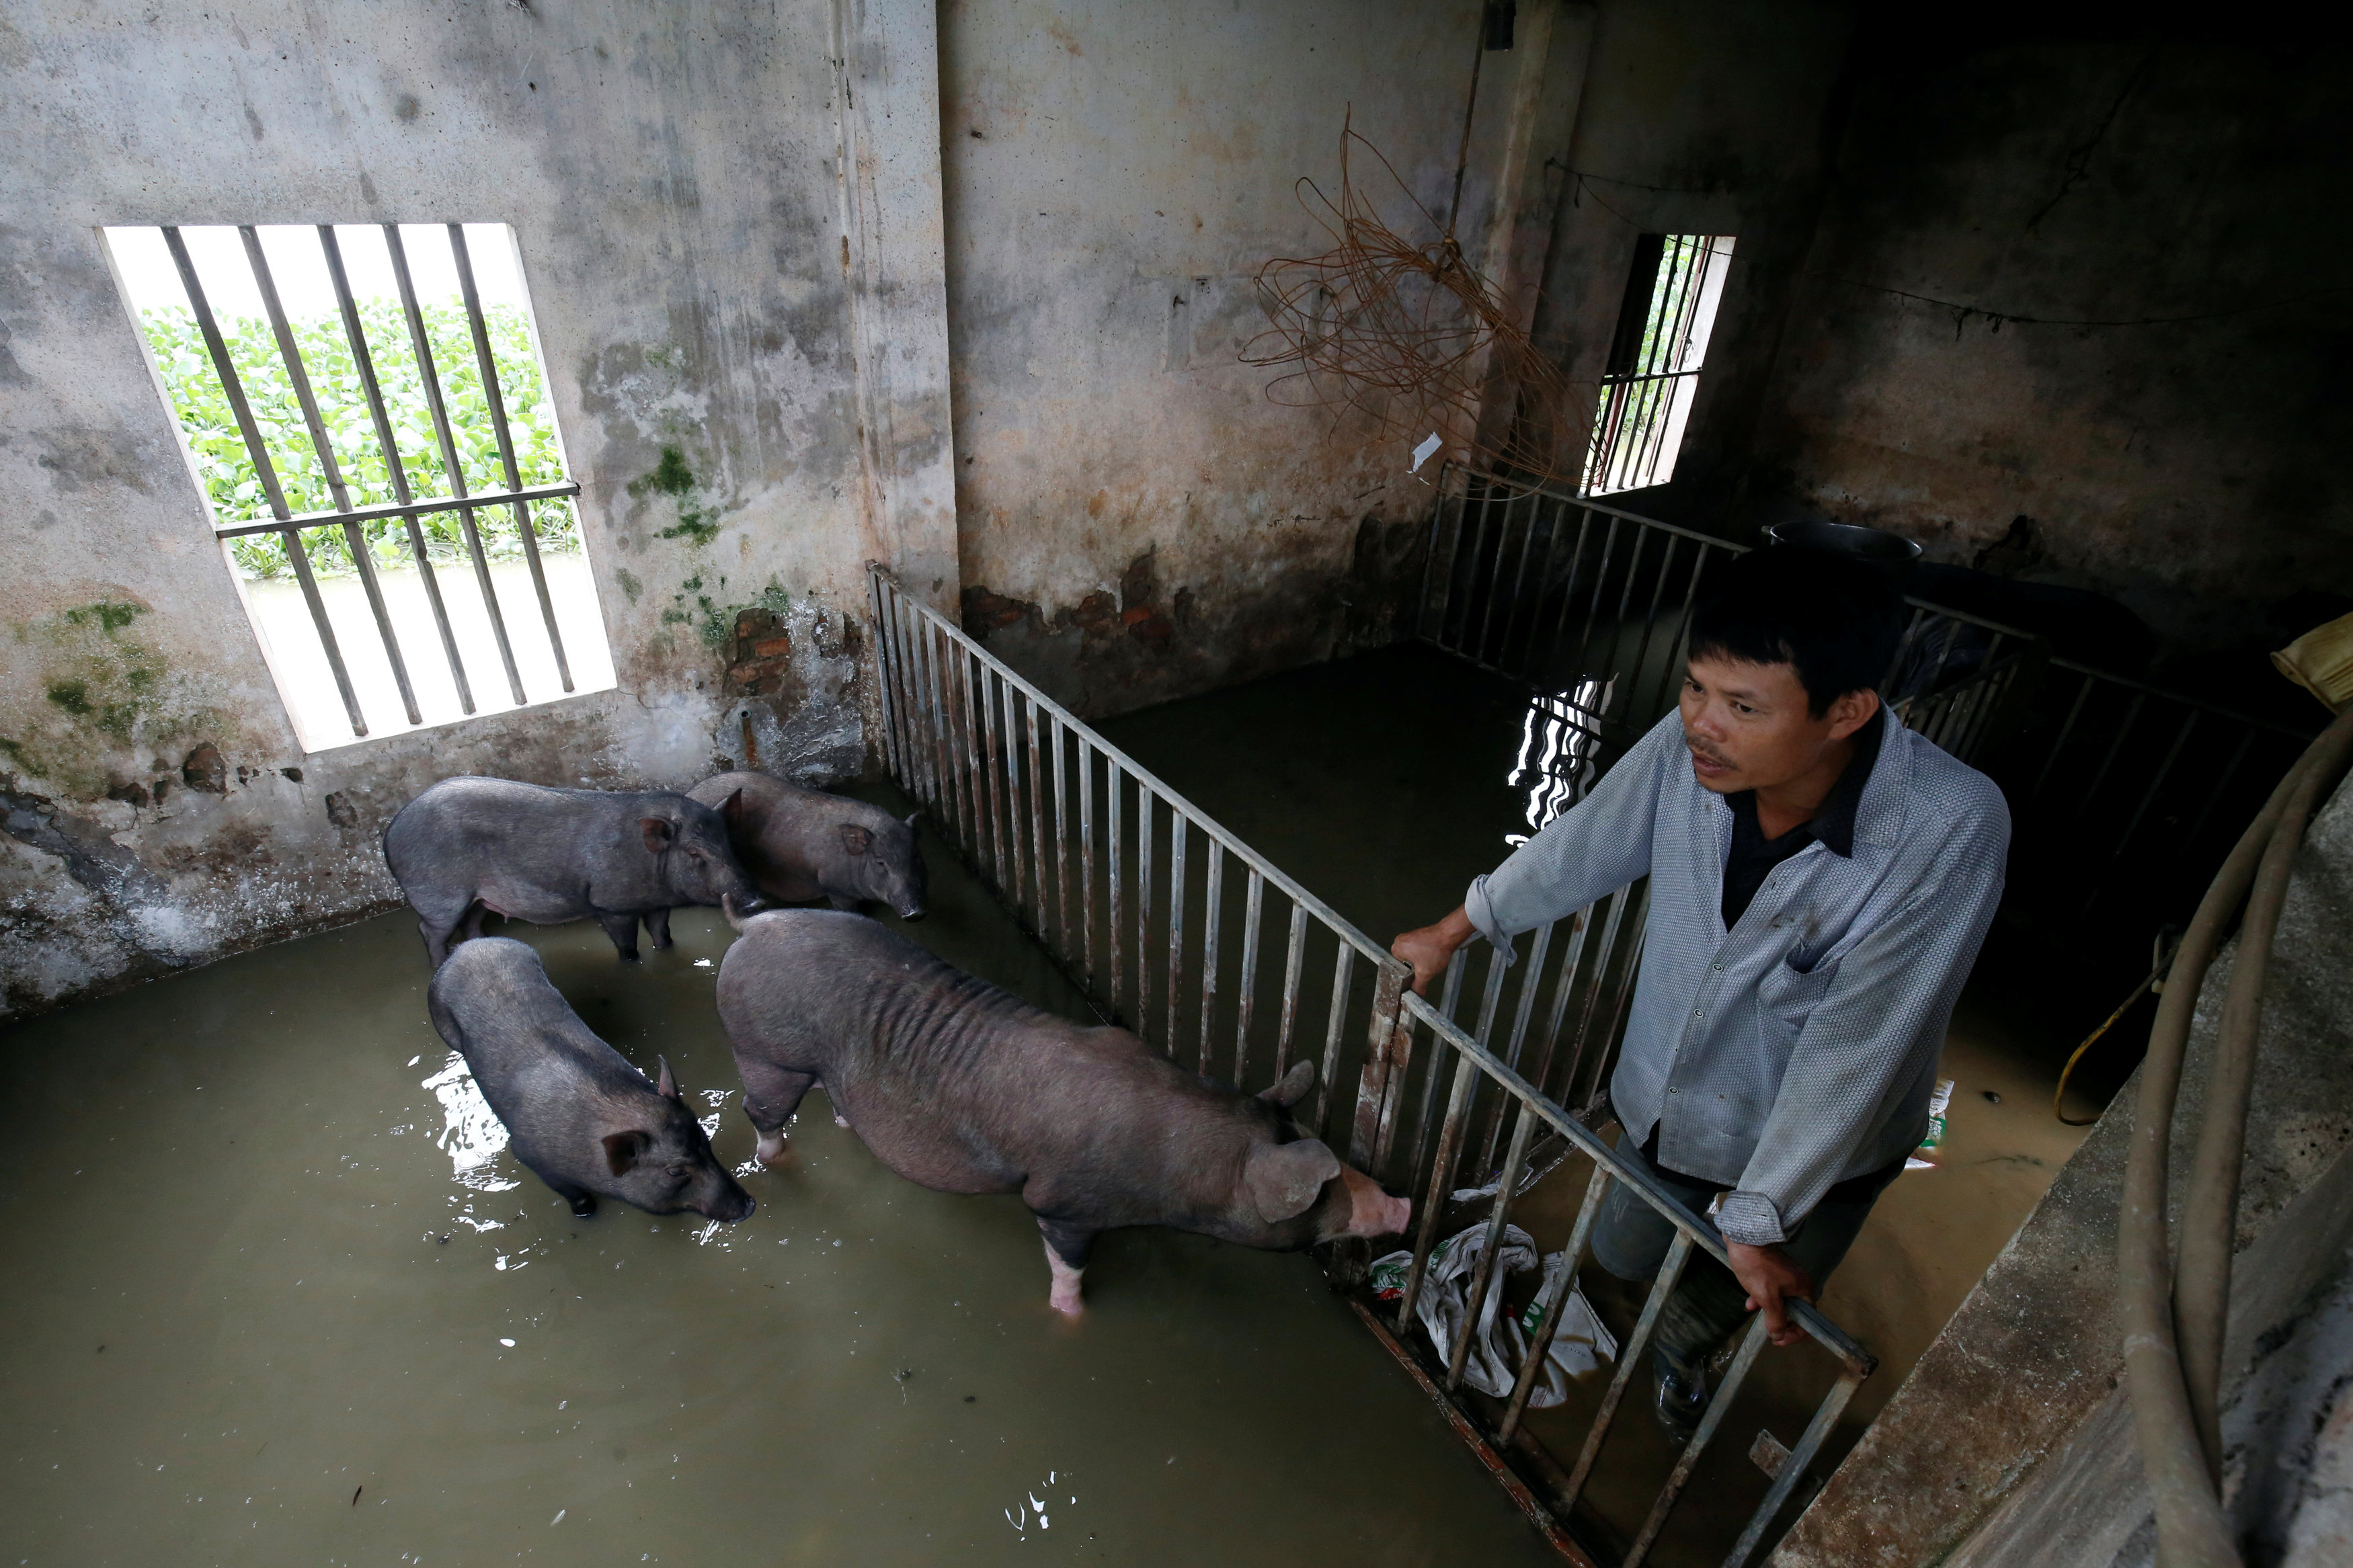 A farmer stands in his flooded pig farm after a tropical depression in Hanoi, Vietnam October 13, 2017. Photo: Reuters